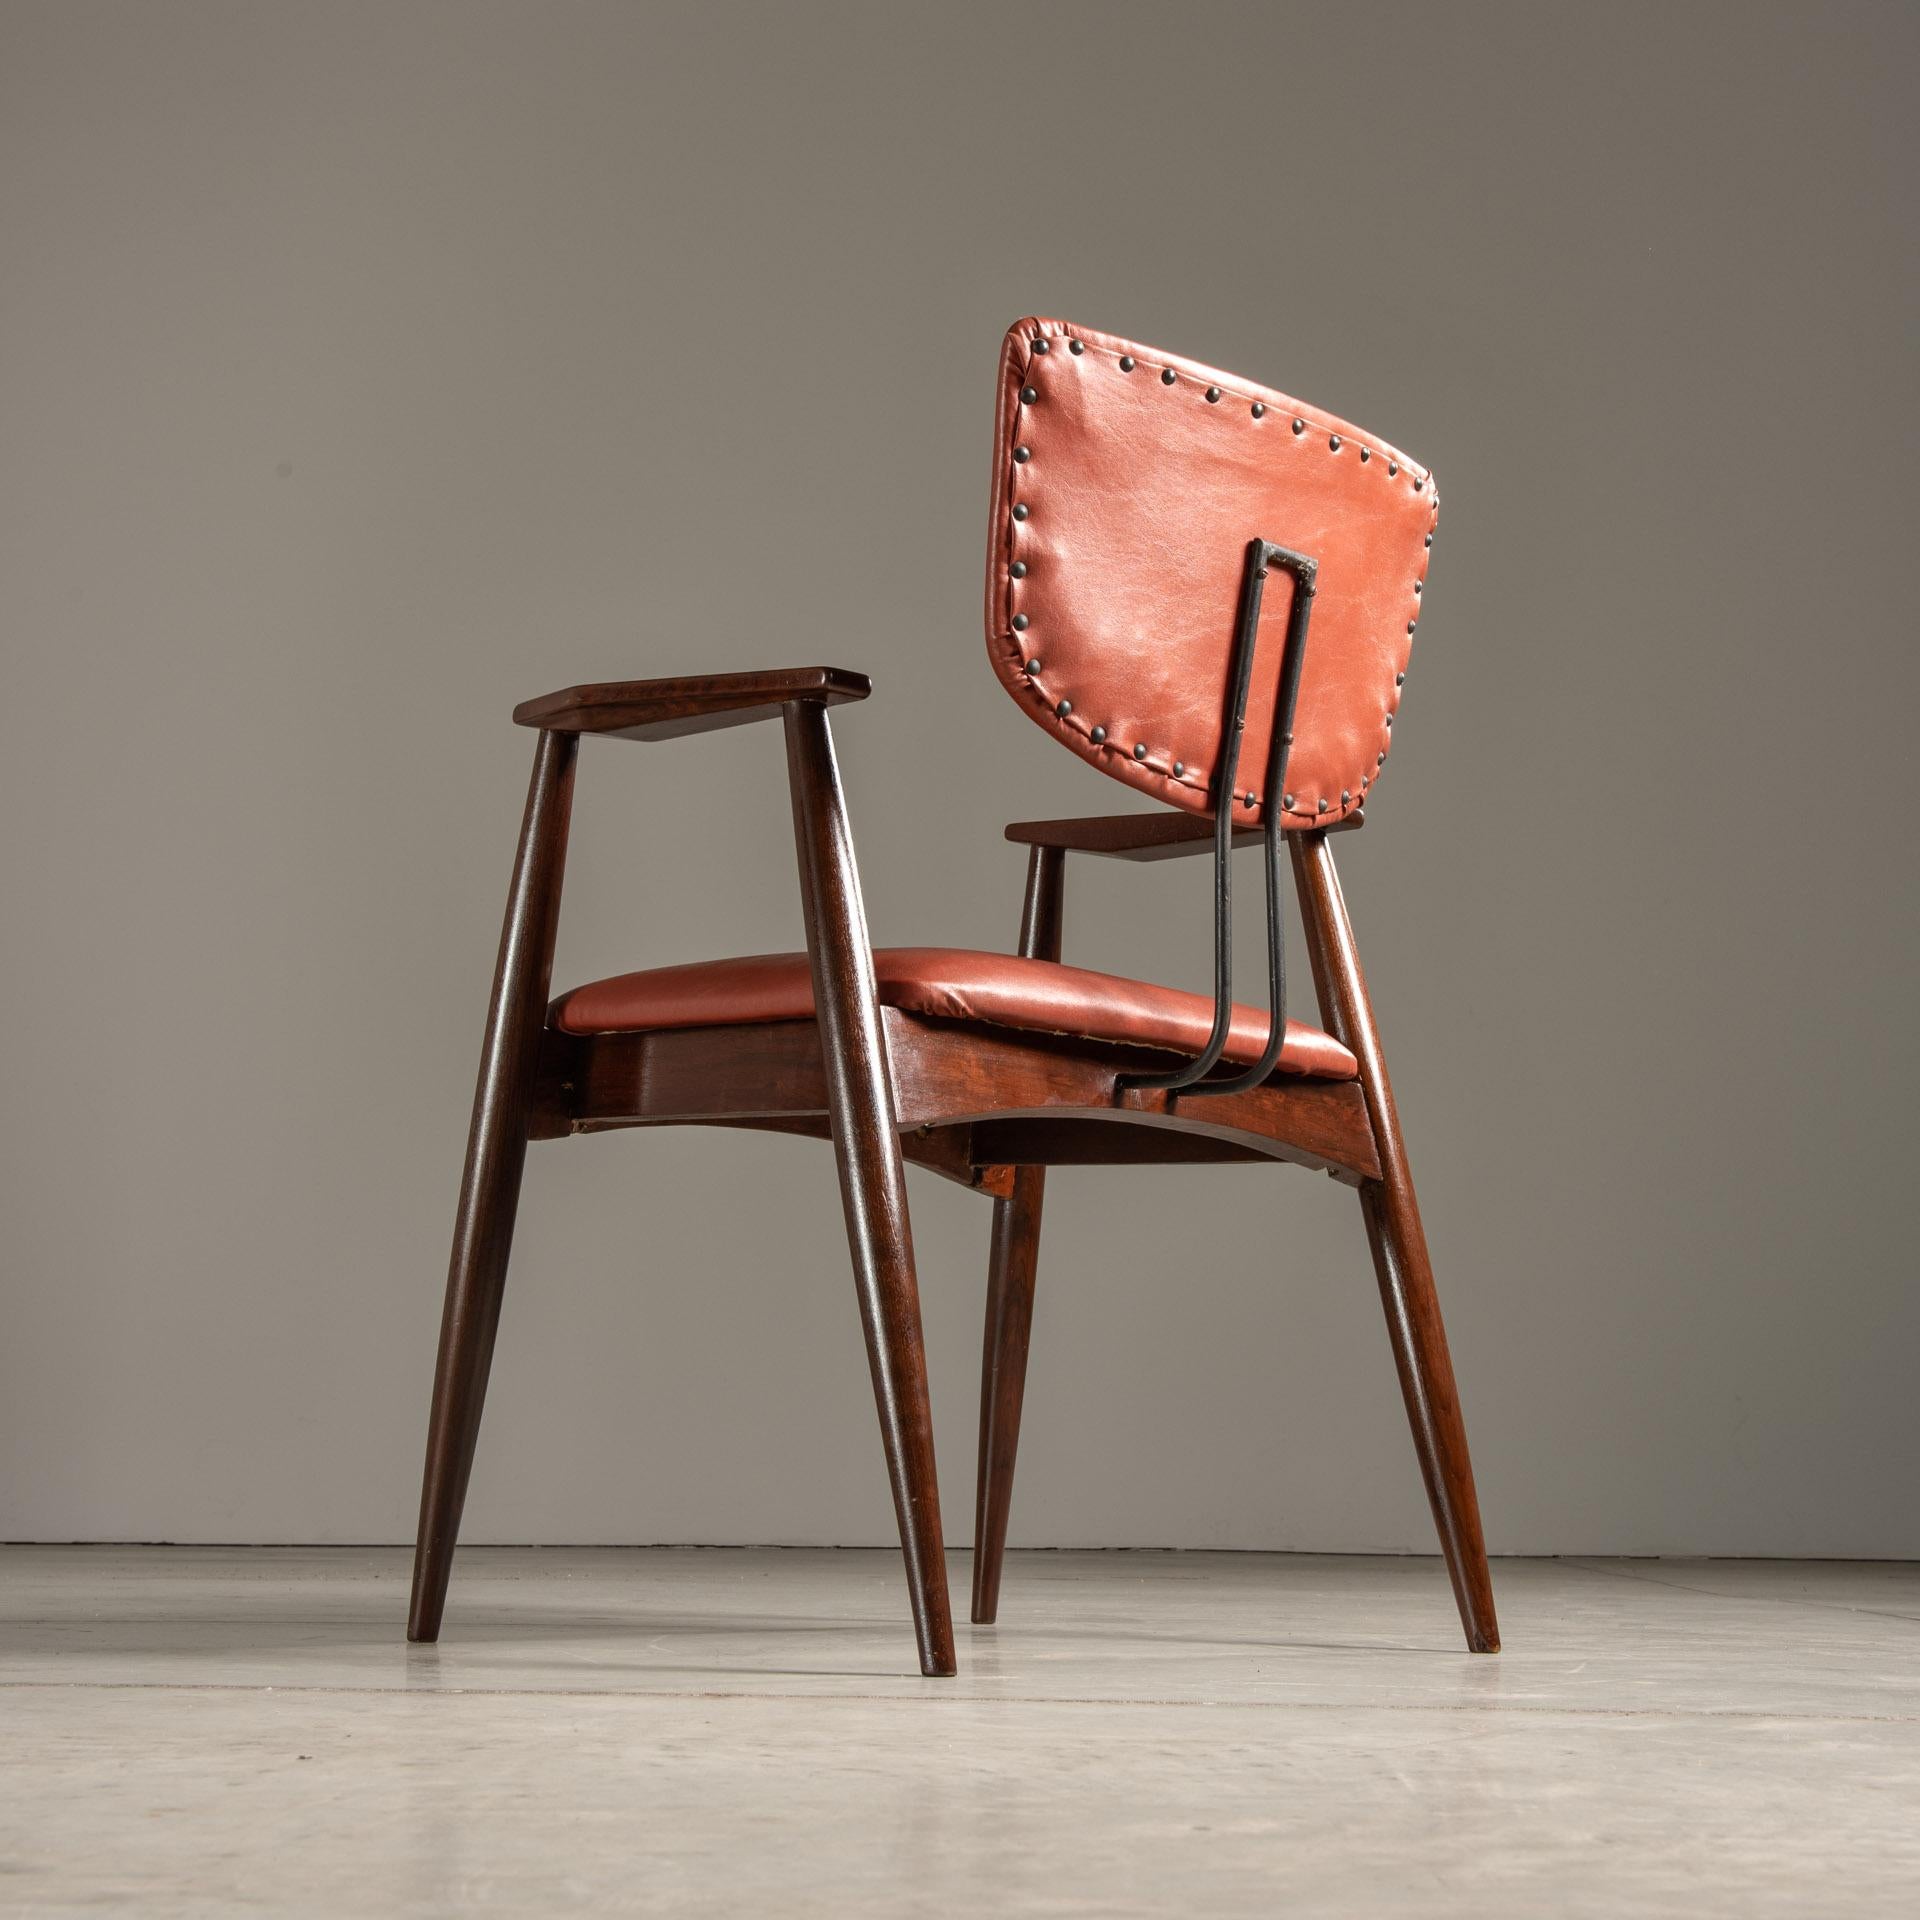 Chair in Wood, Iron and Leather, by Michel Arnoult, Brazilian Mid-Century Modern For Sale 1